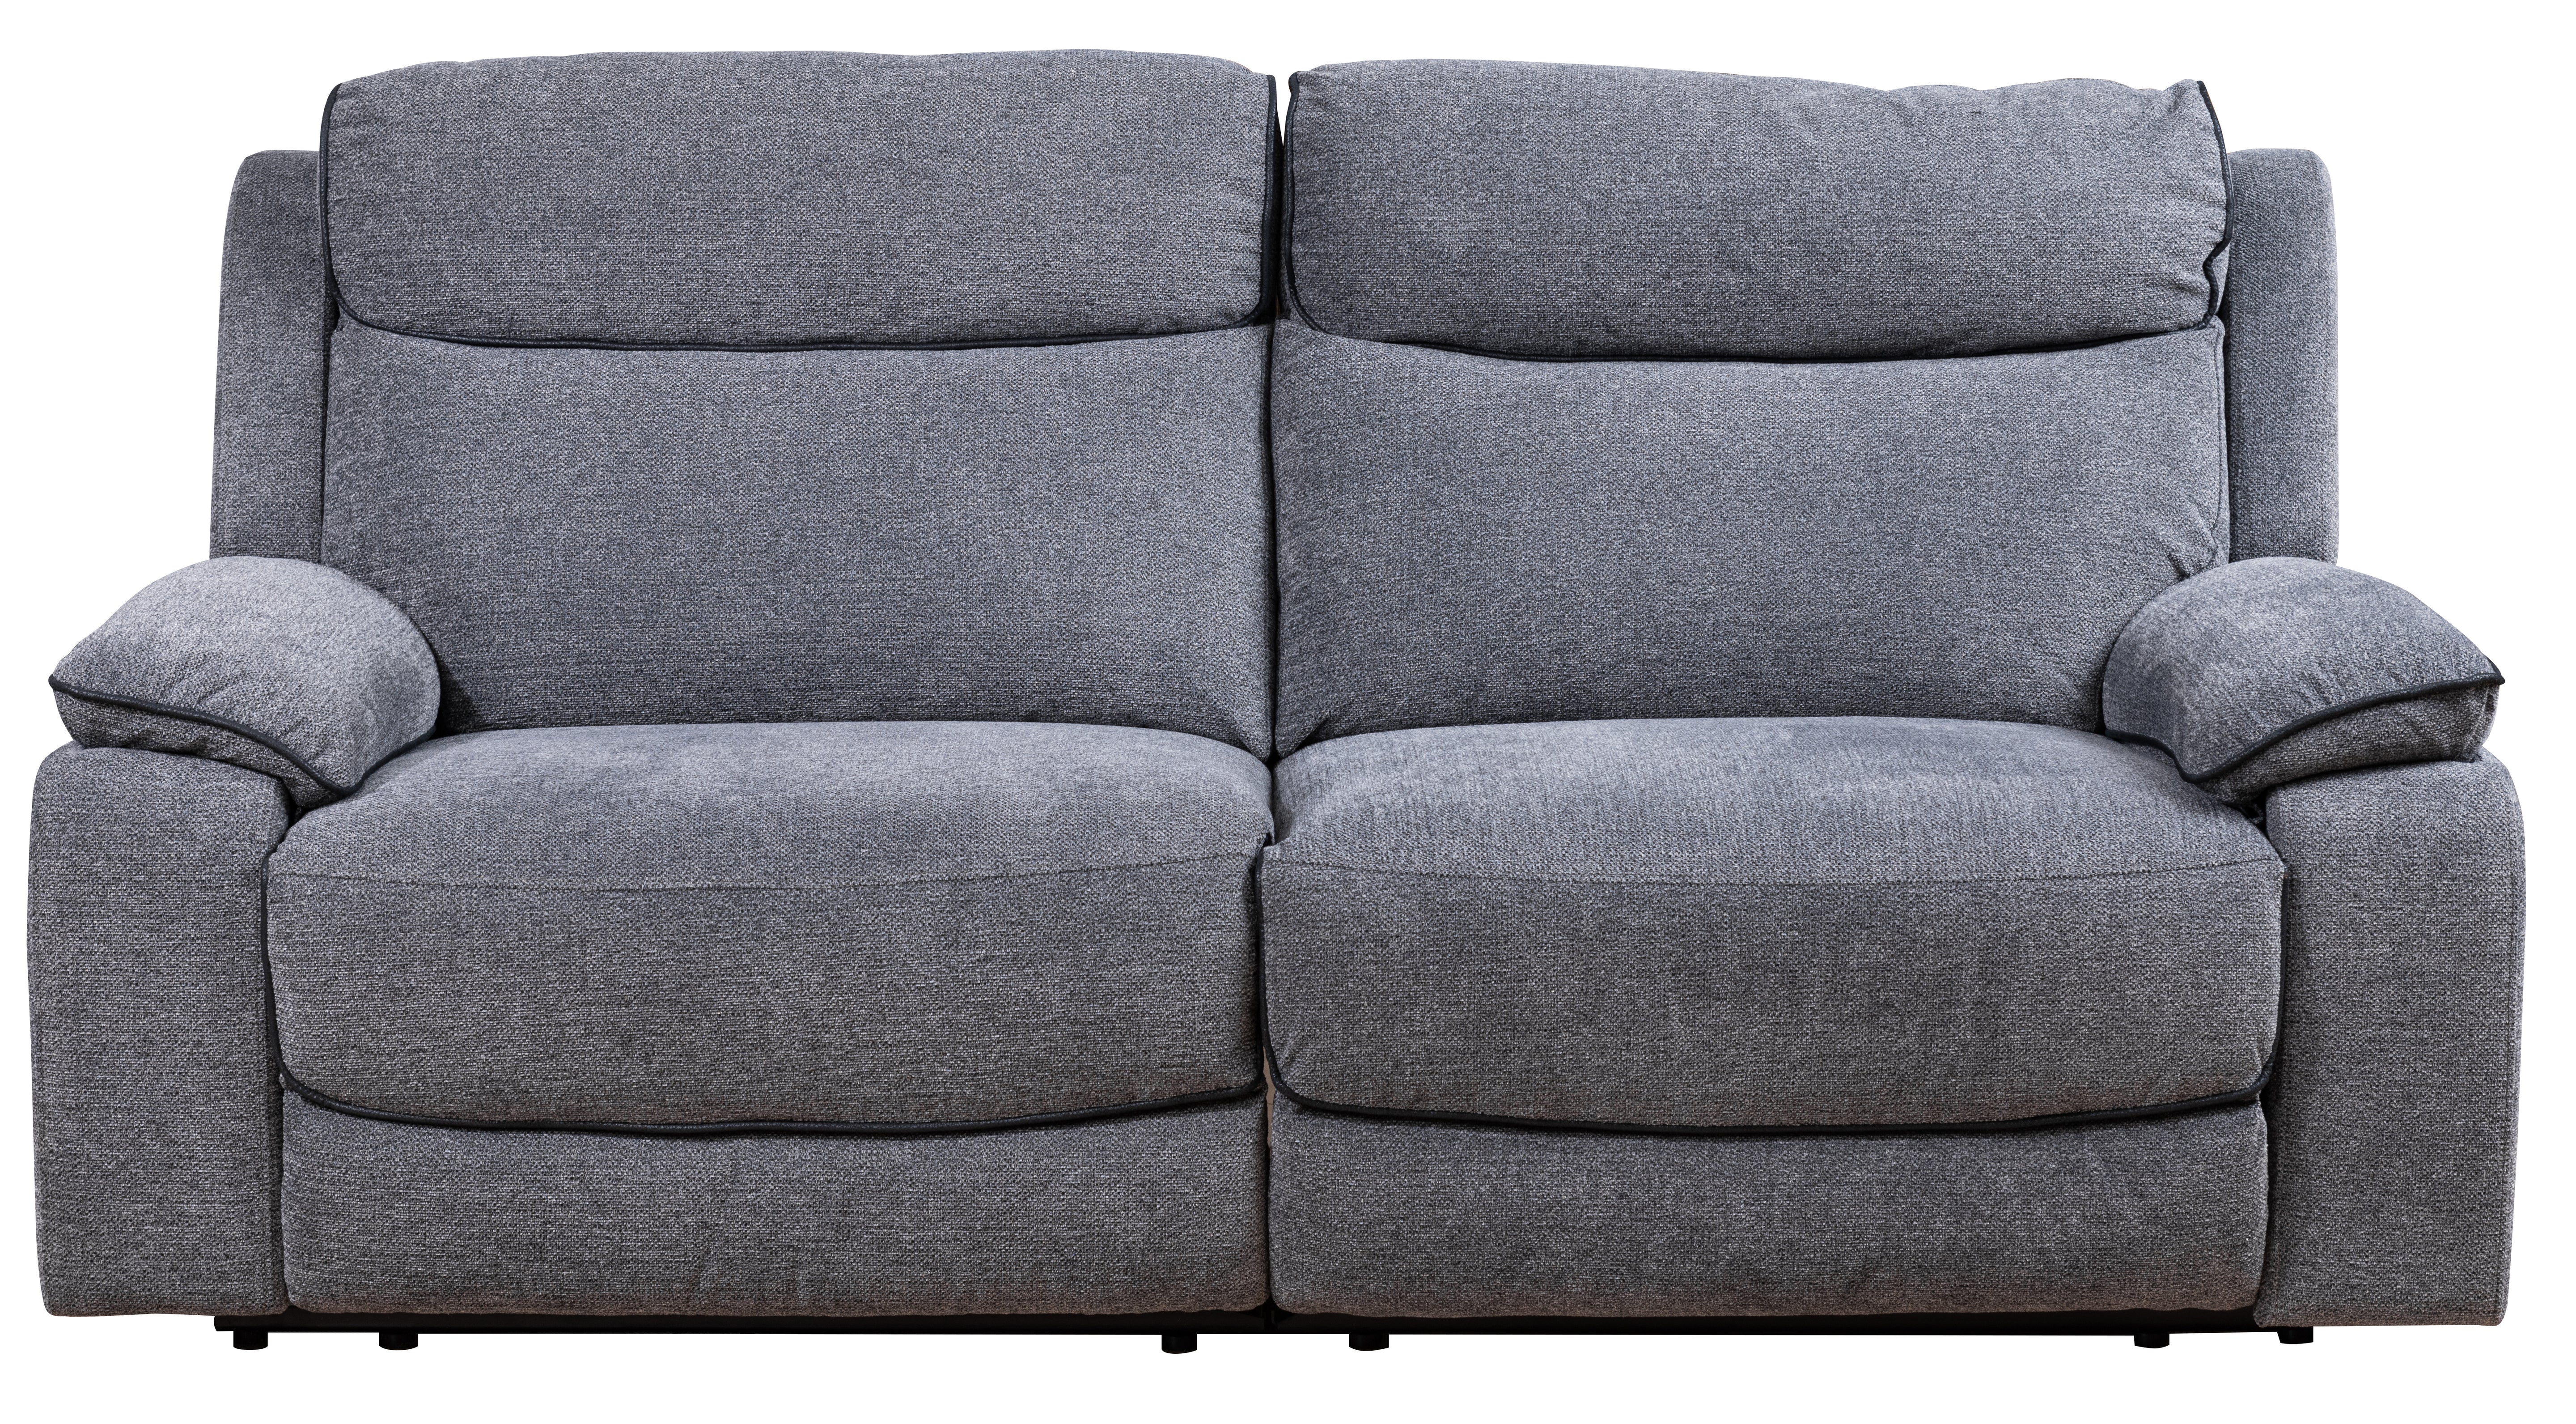 Peru 3 Seater Sofa With Power Recliner